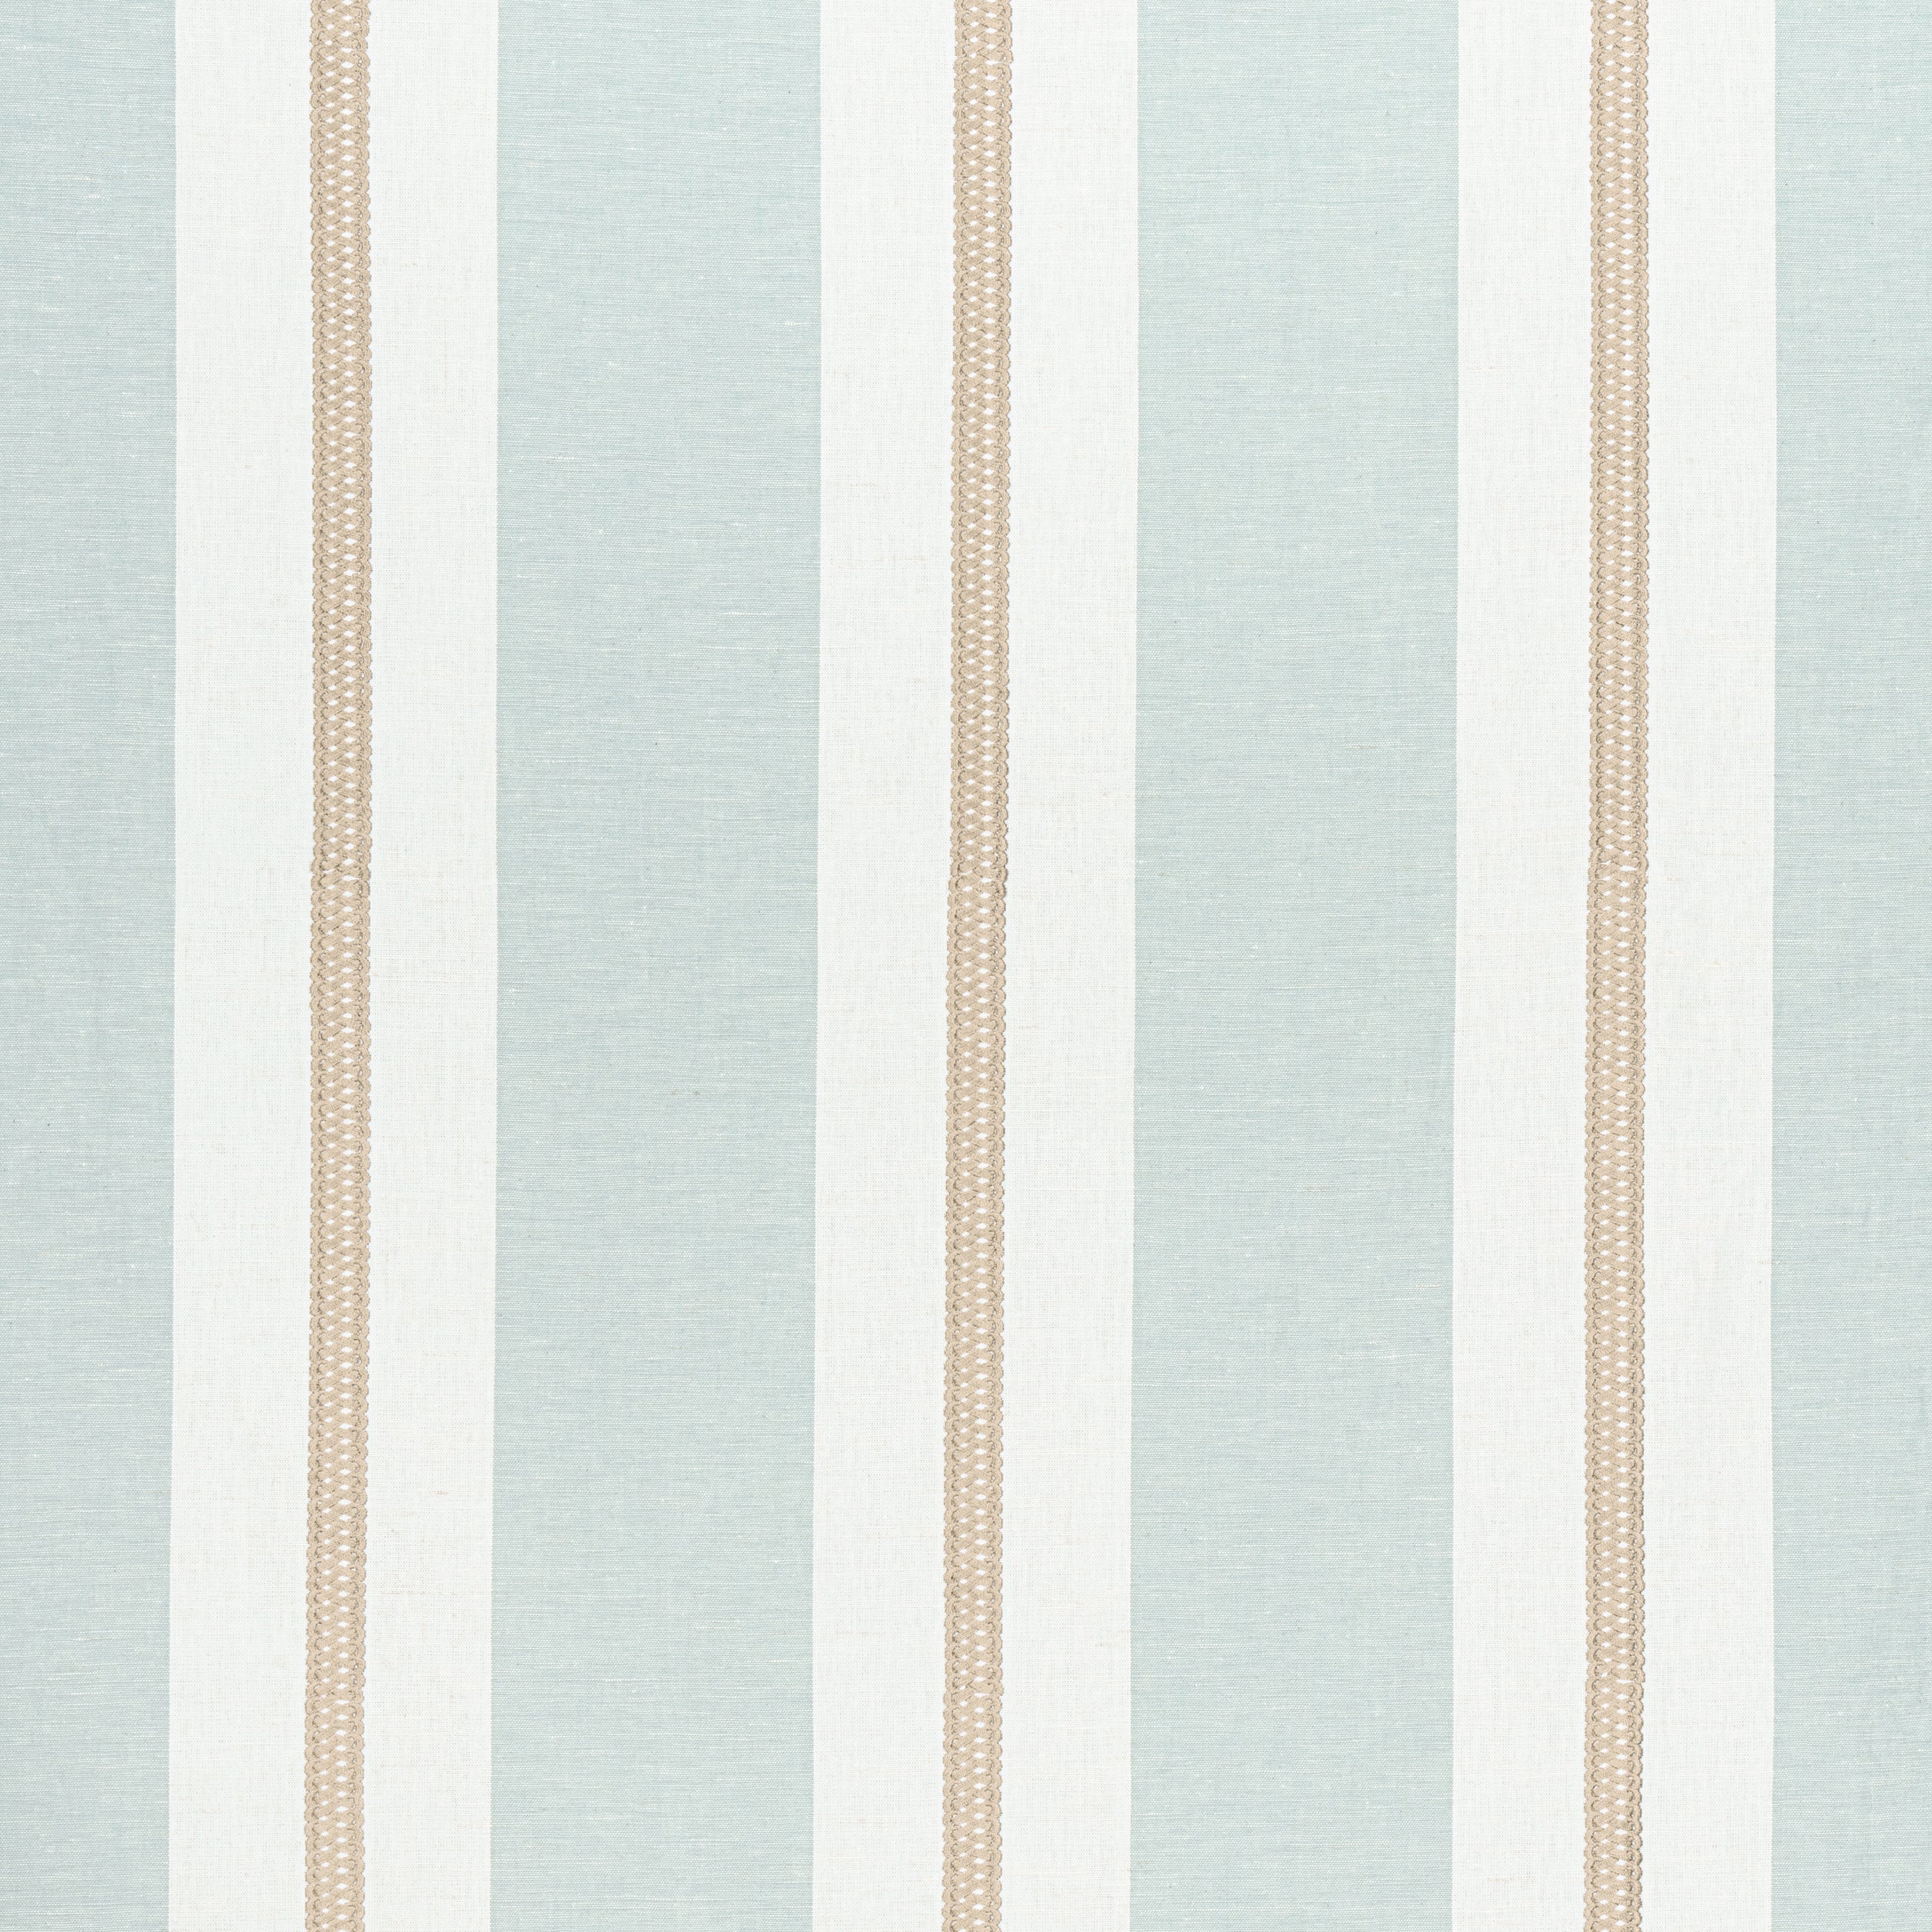 Alden Stripe Embroidery fabric in Beige color - pattern number AW24534 - by Anna French in the Devon collection